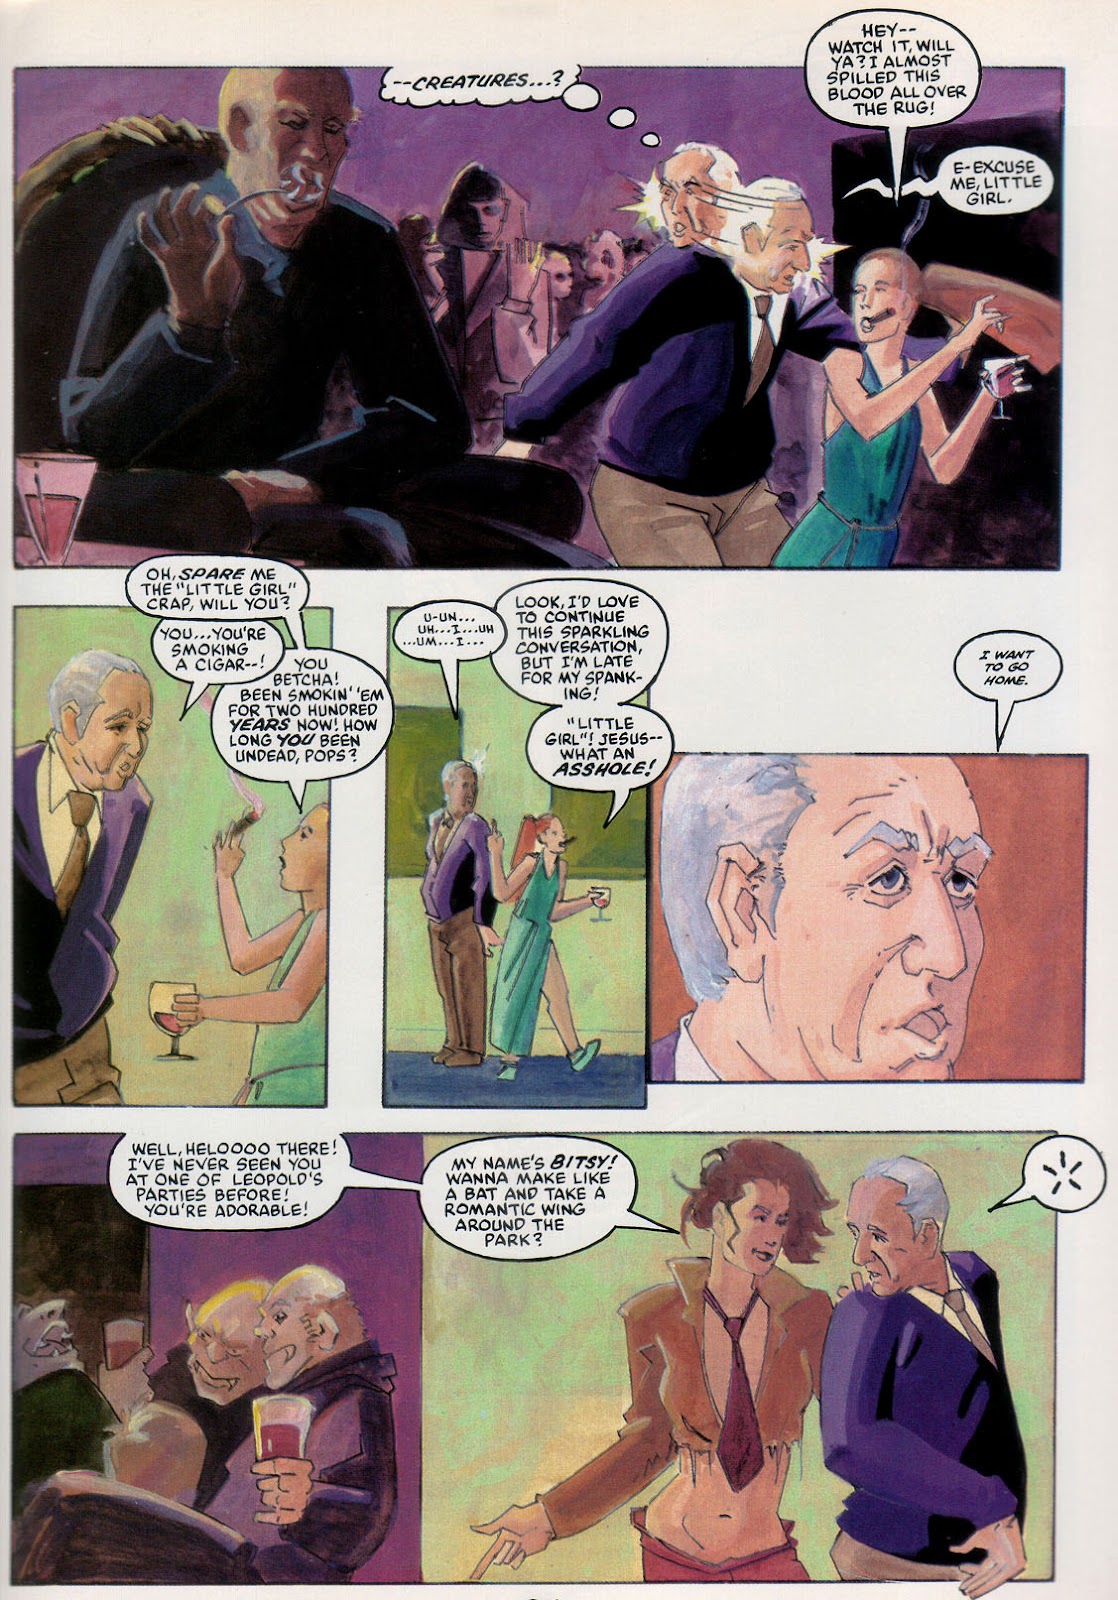 Marvel Graphic Novel issue 20 - Greenberg the Vampire - Page 41